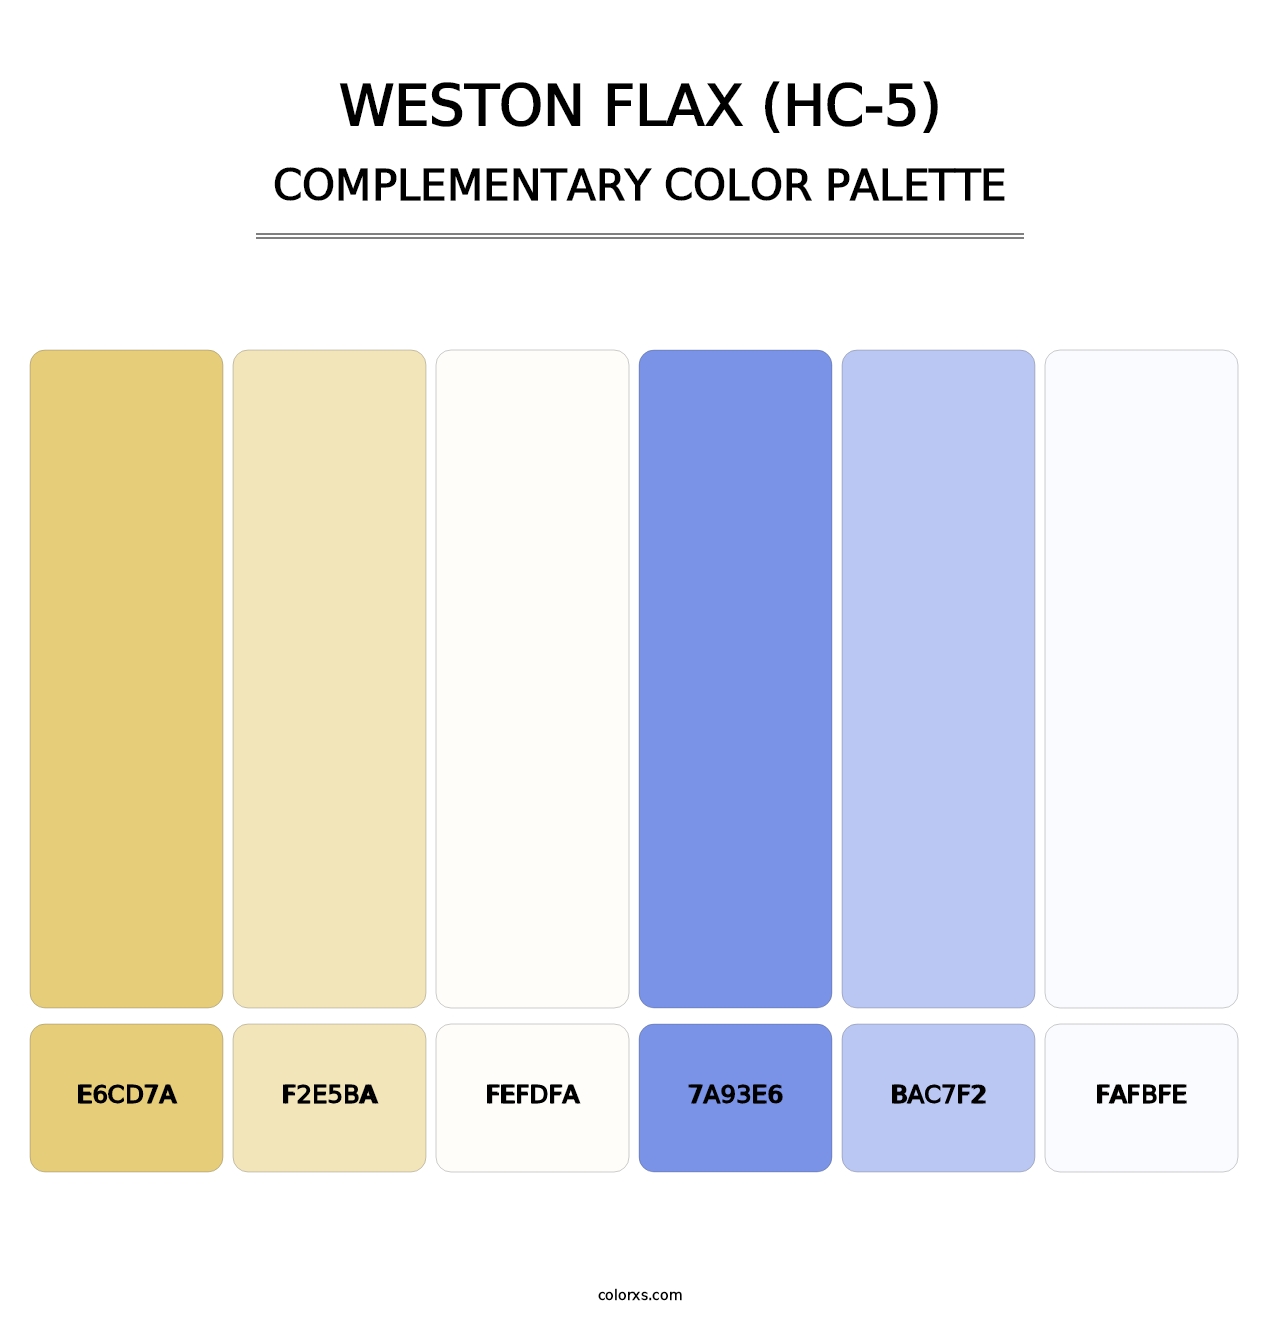 Weston Flax (HC-5) - Complementary Color Palette